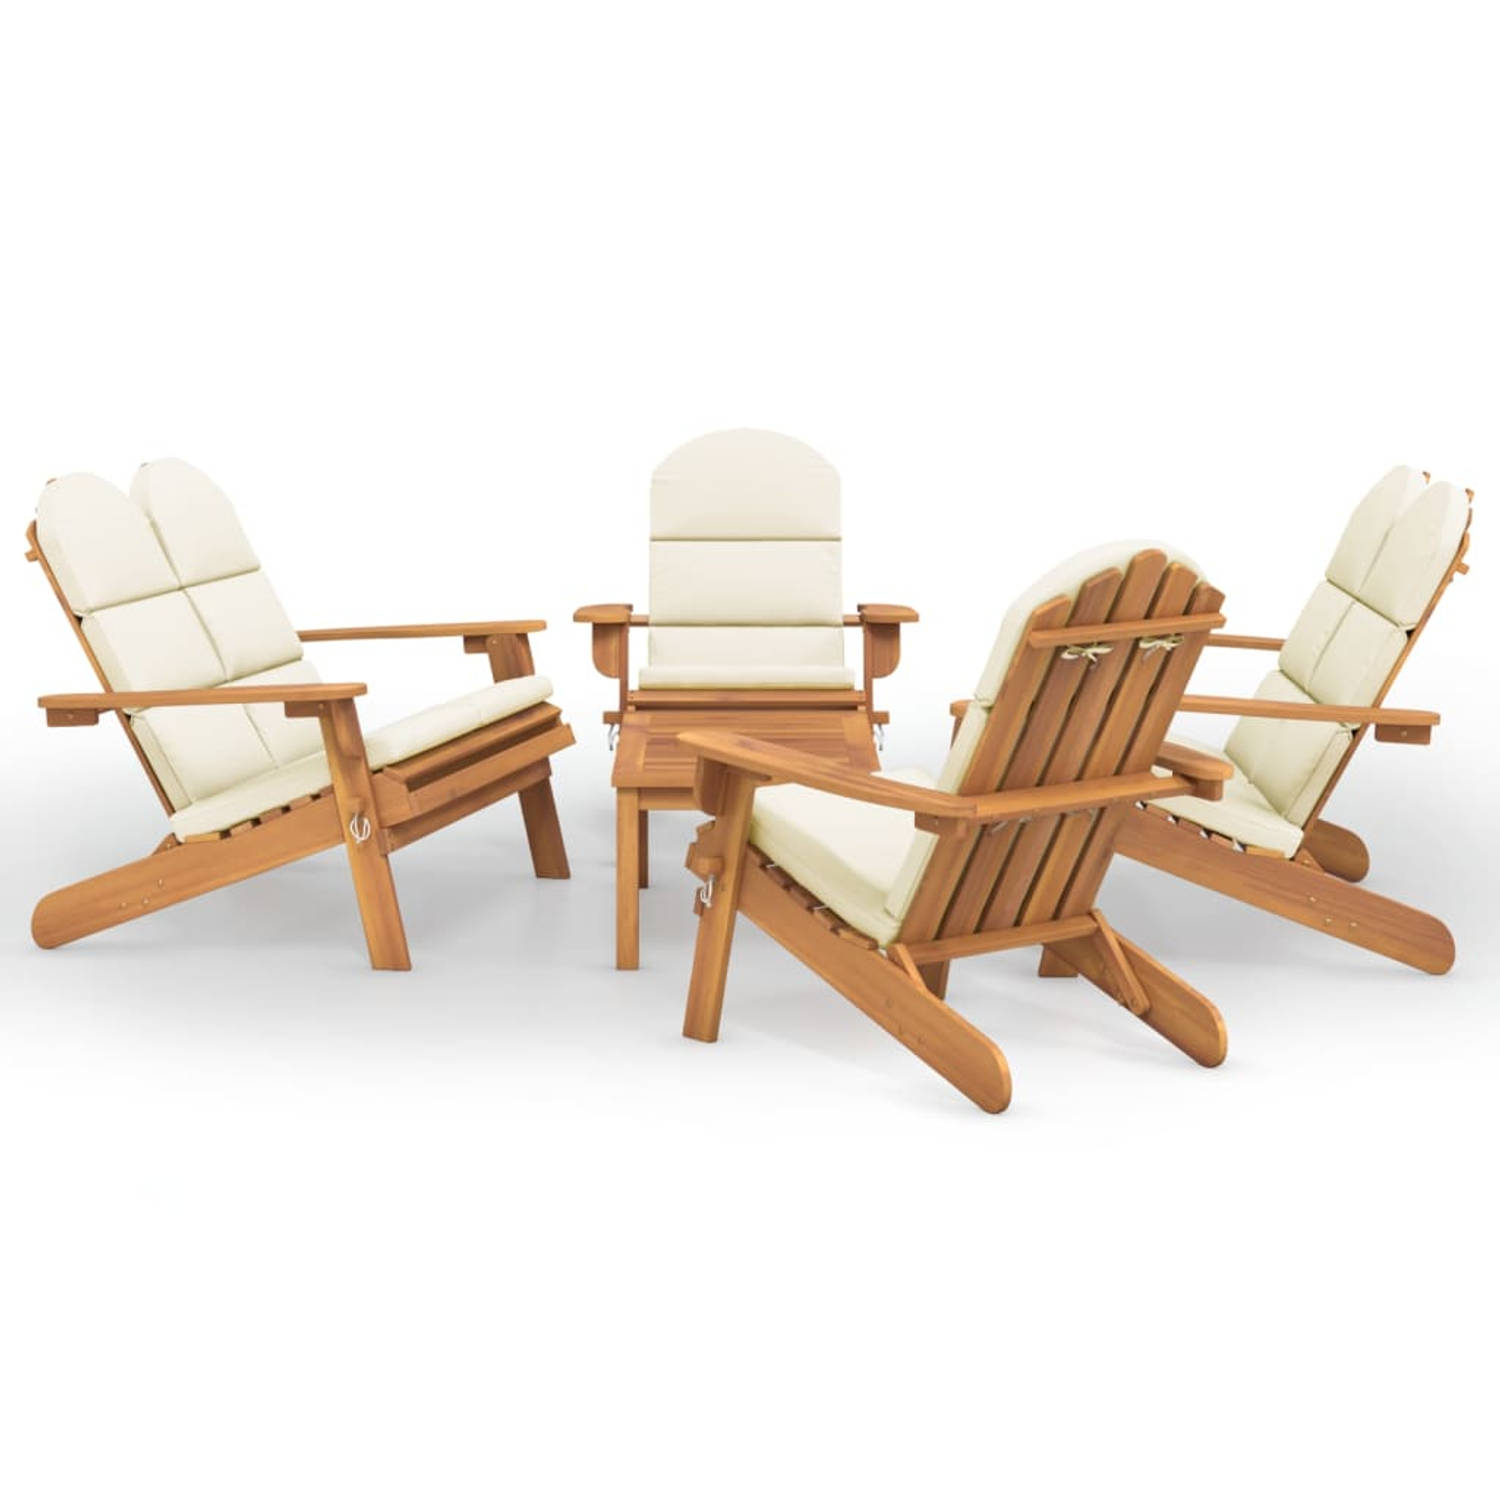 The Living Store 5-delige Loungeset Adirondack massief acaciahout - Tuinset